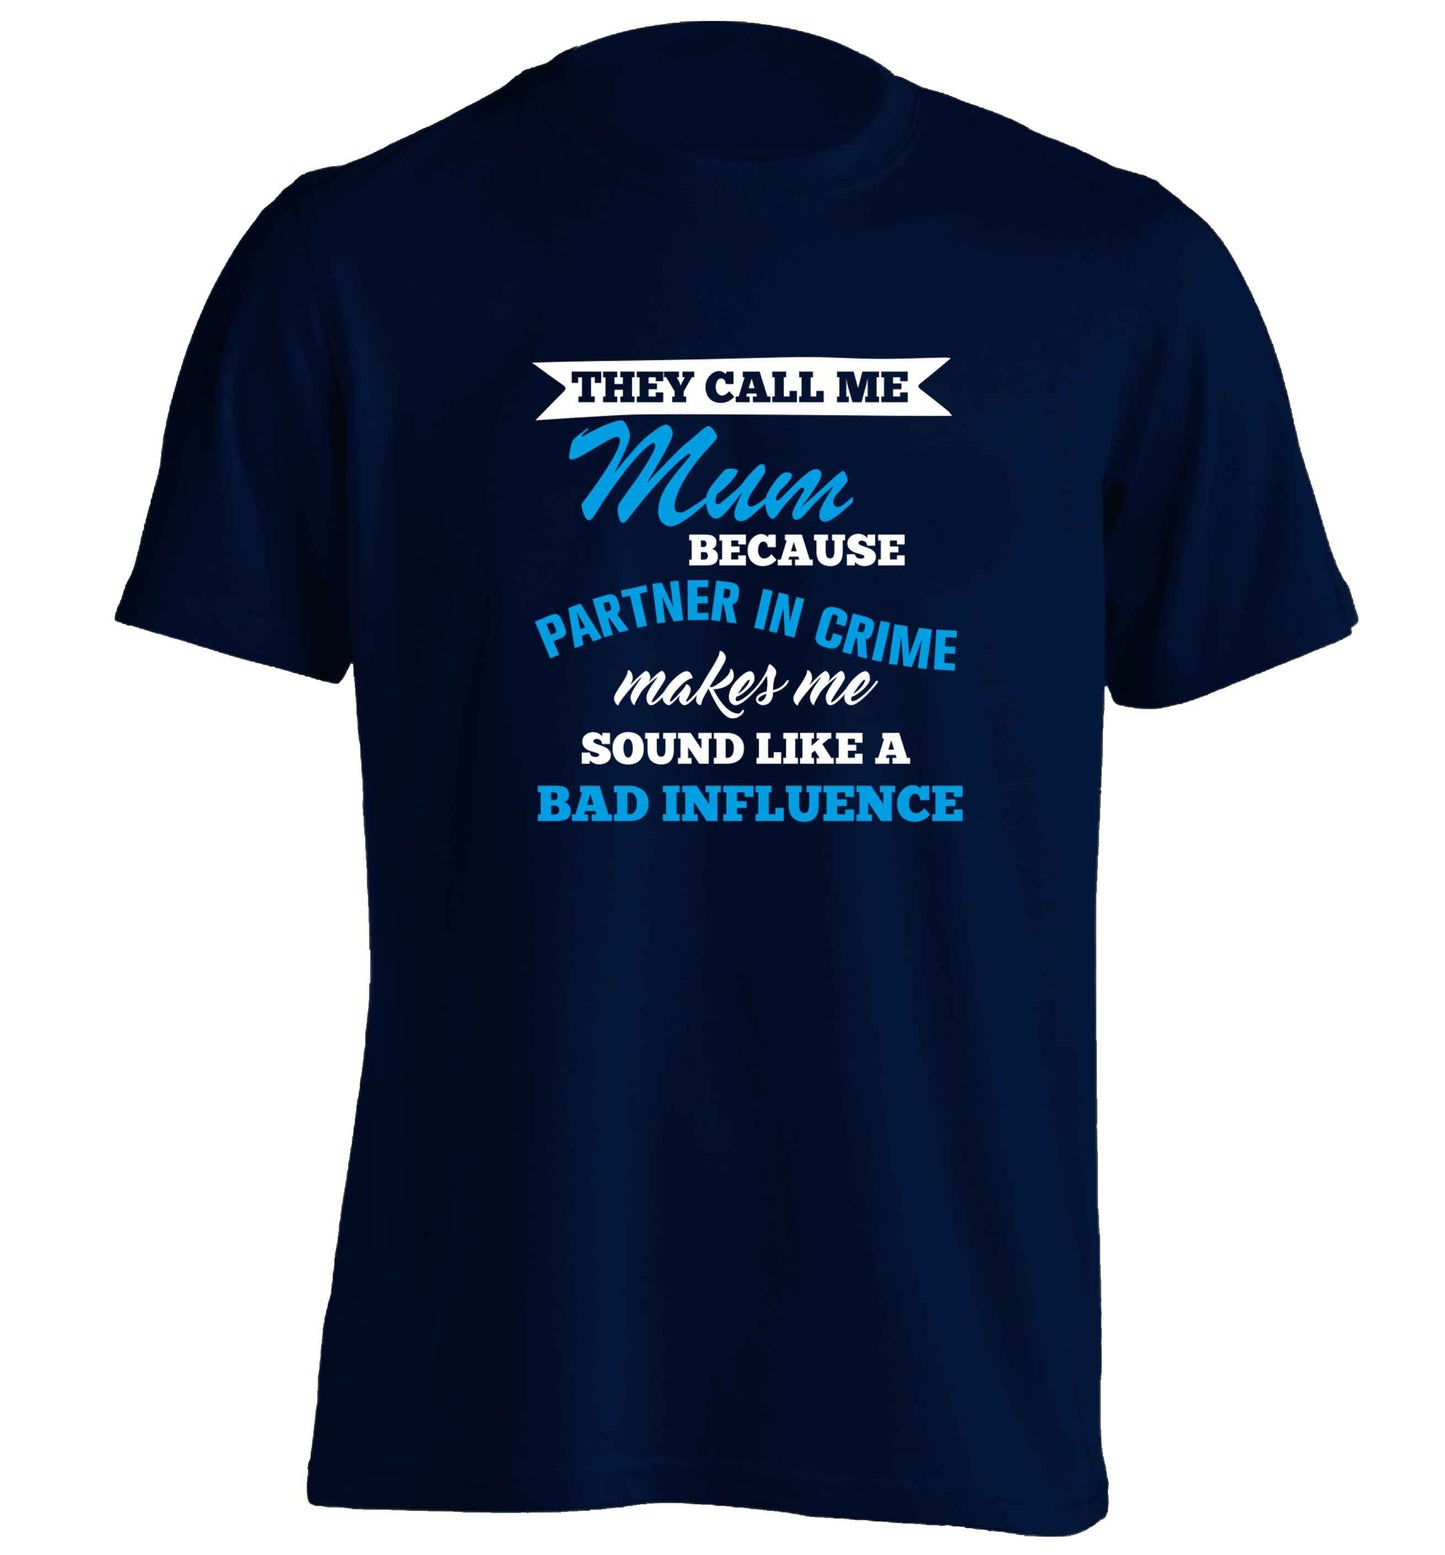 They call me mum because partner in crime makes me sound like a bad influence adults unisex navy Tshirt 2XL